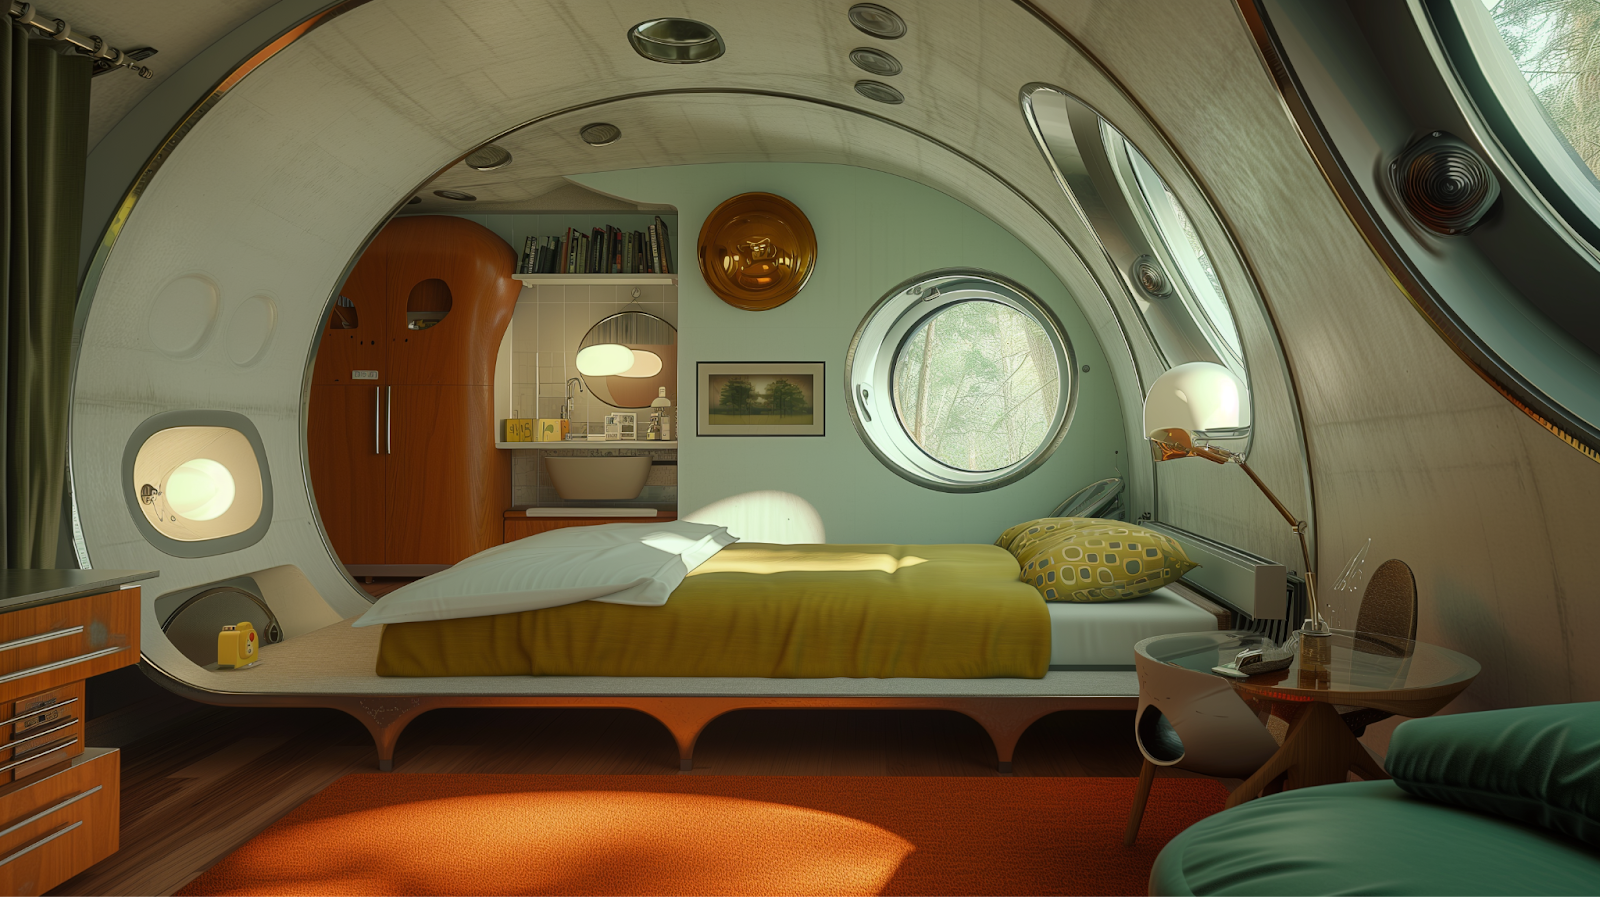 Bedroom view of a Futuro house.